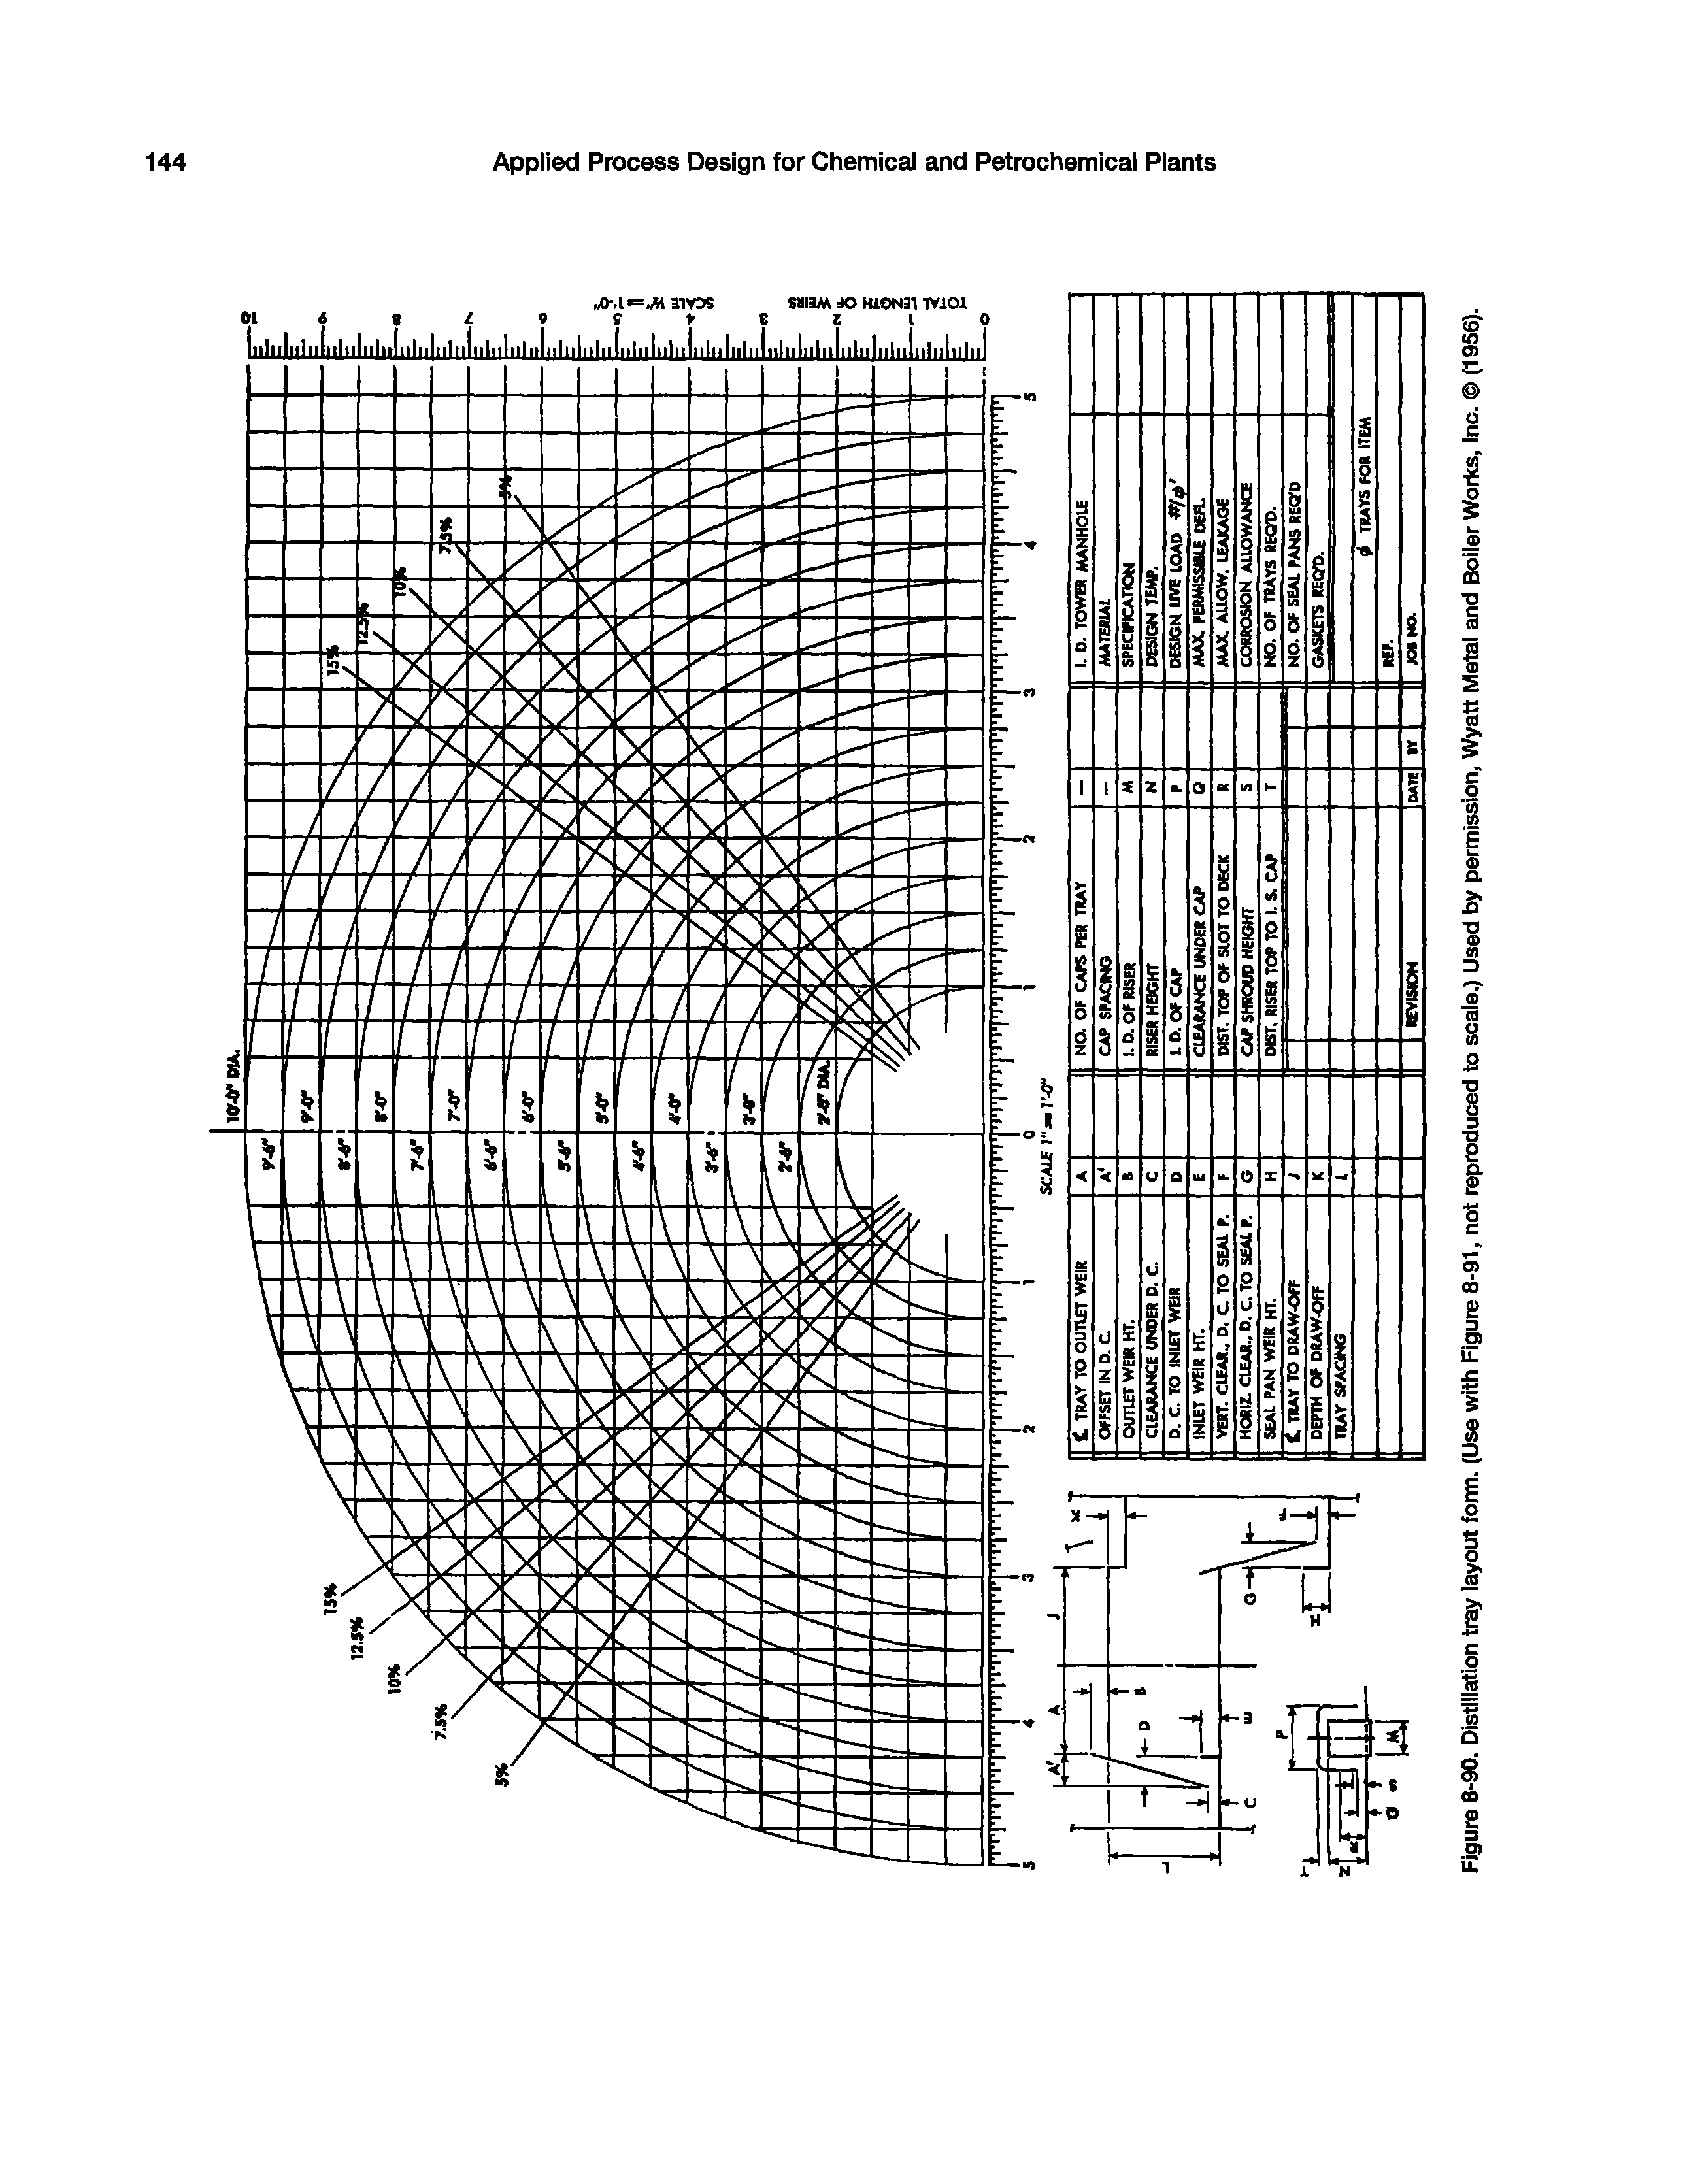 Figure 8-90. Distillation tray layout form. (Use with Figure 8-91, not reproduced to scale.) Used by permission, Wyatt Metal and Boiler Worlds, Inc. (1956).